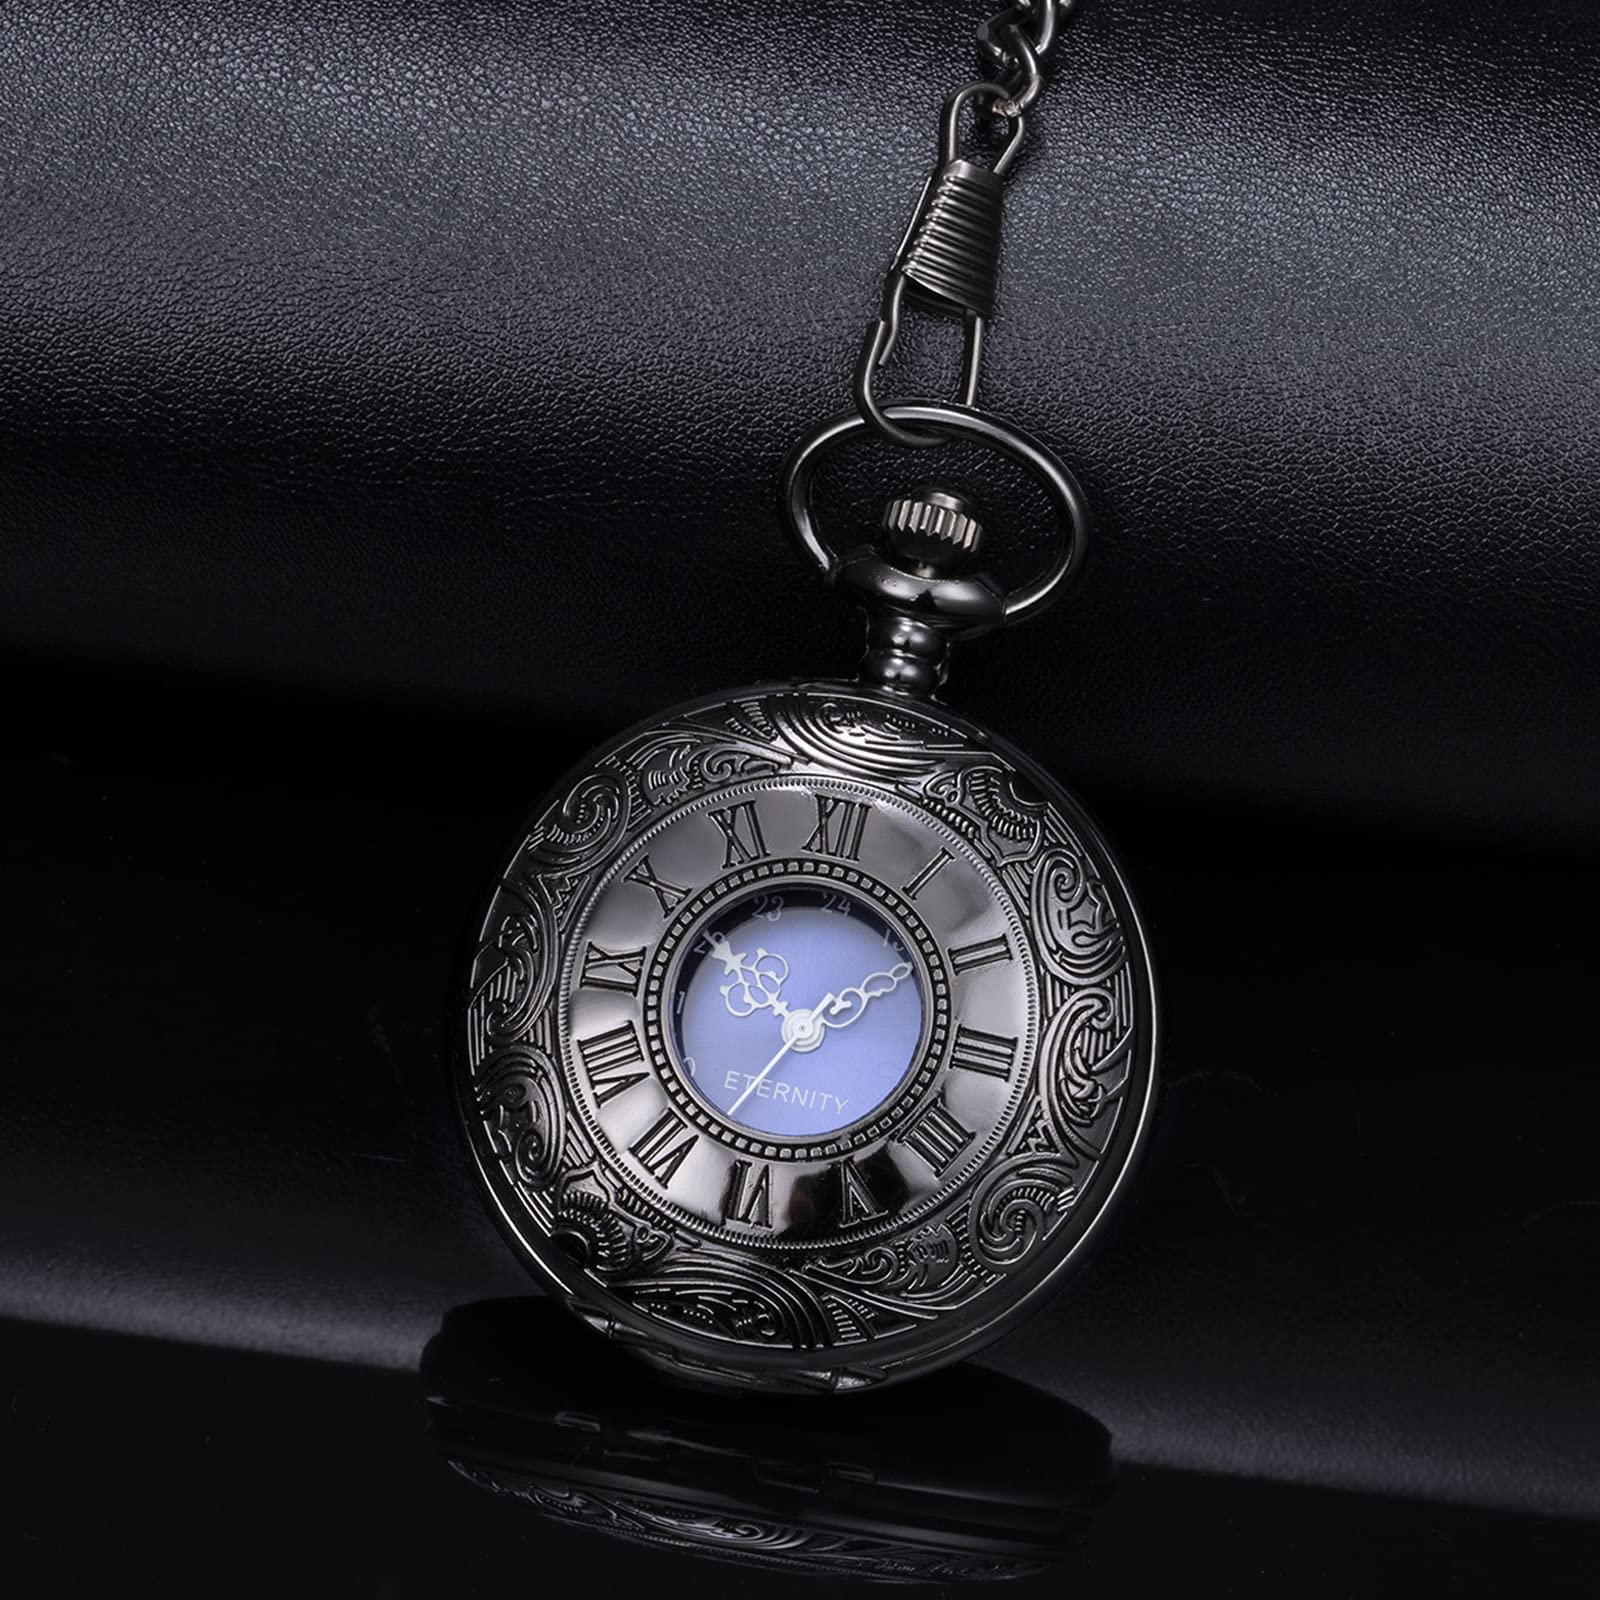 BOSHIYA Vintage Pocket Watch with Chain, Mens Quartz Bronze Pocket Watch with Roman Numerals Scale and Unique Blue Dial Apply to Christmas Graduation Birthday Gifts Fathers Day